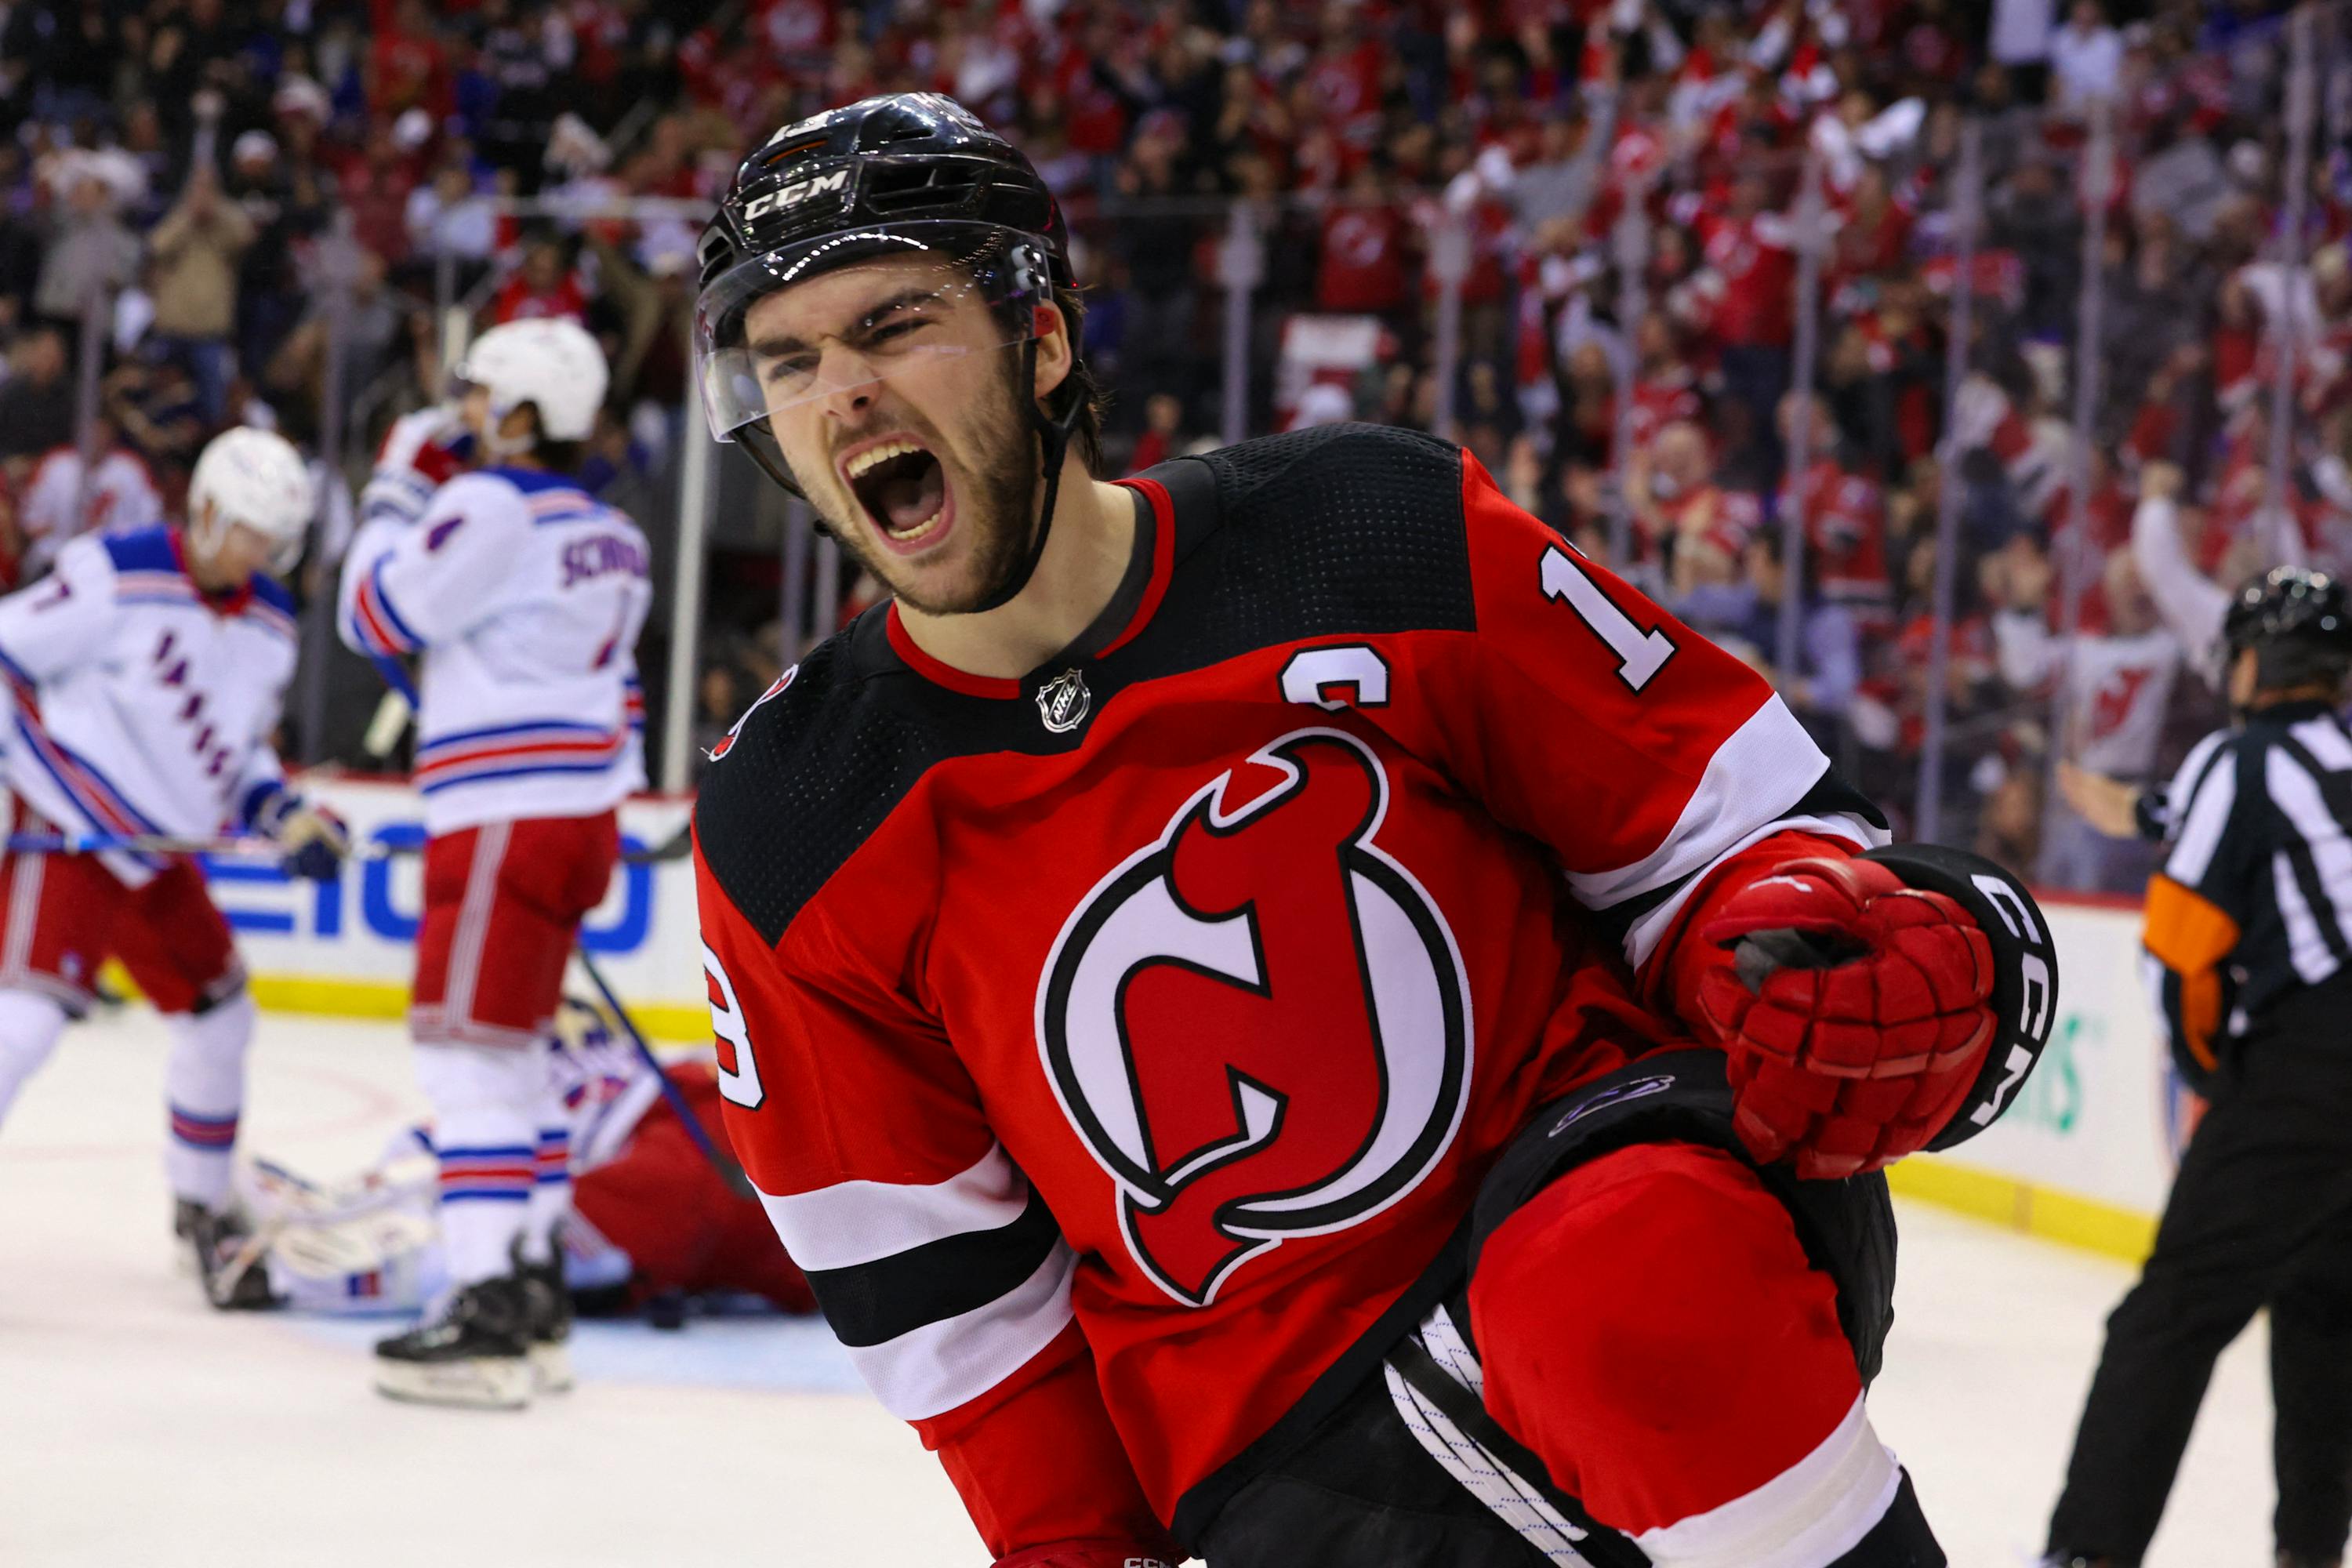 NHL roundup: Devils beat Rangers 4-0 in Game 7 to reach second round